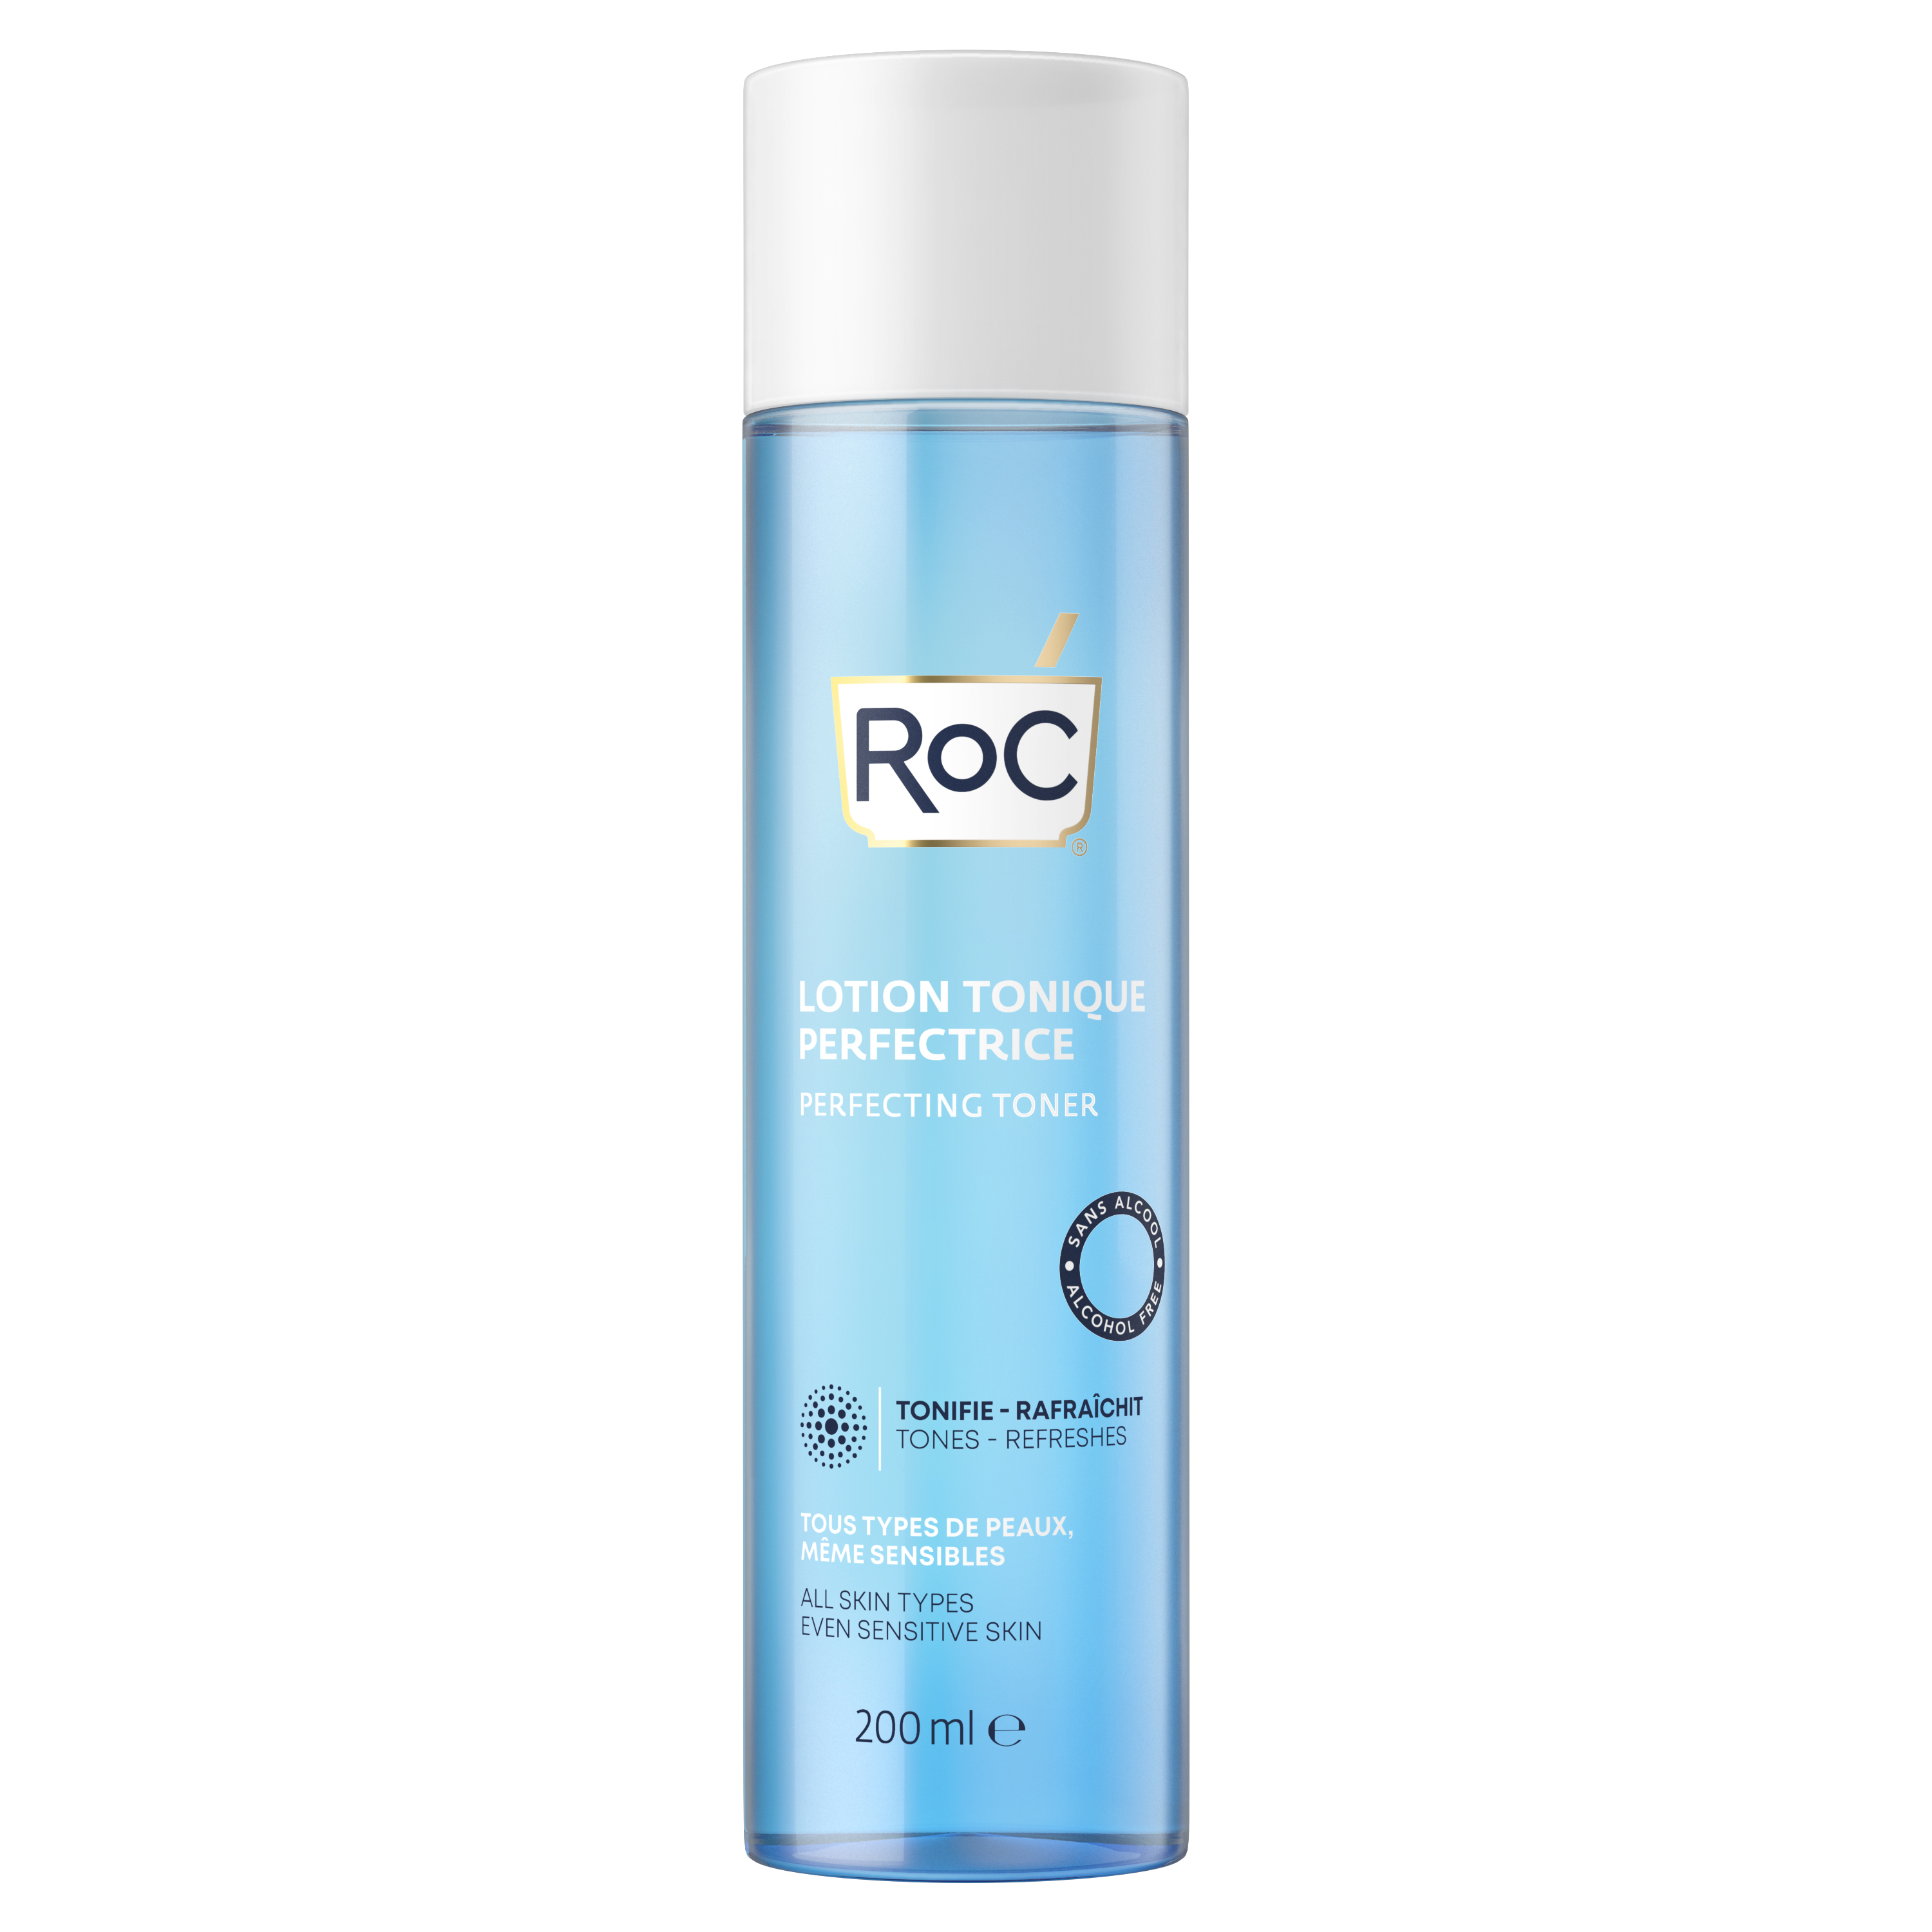 Product Image for ROC Perfecting Toner Lotion 200ml